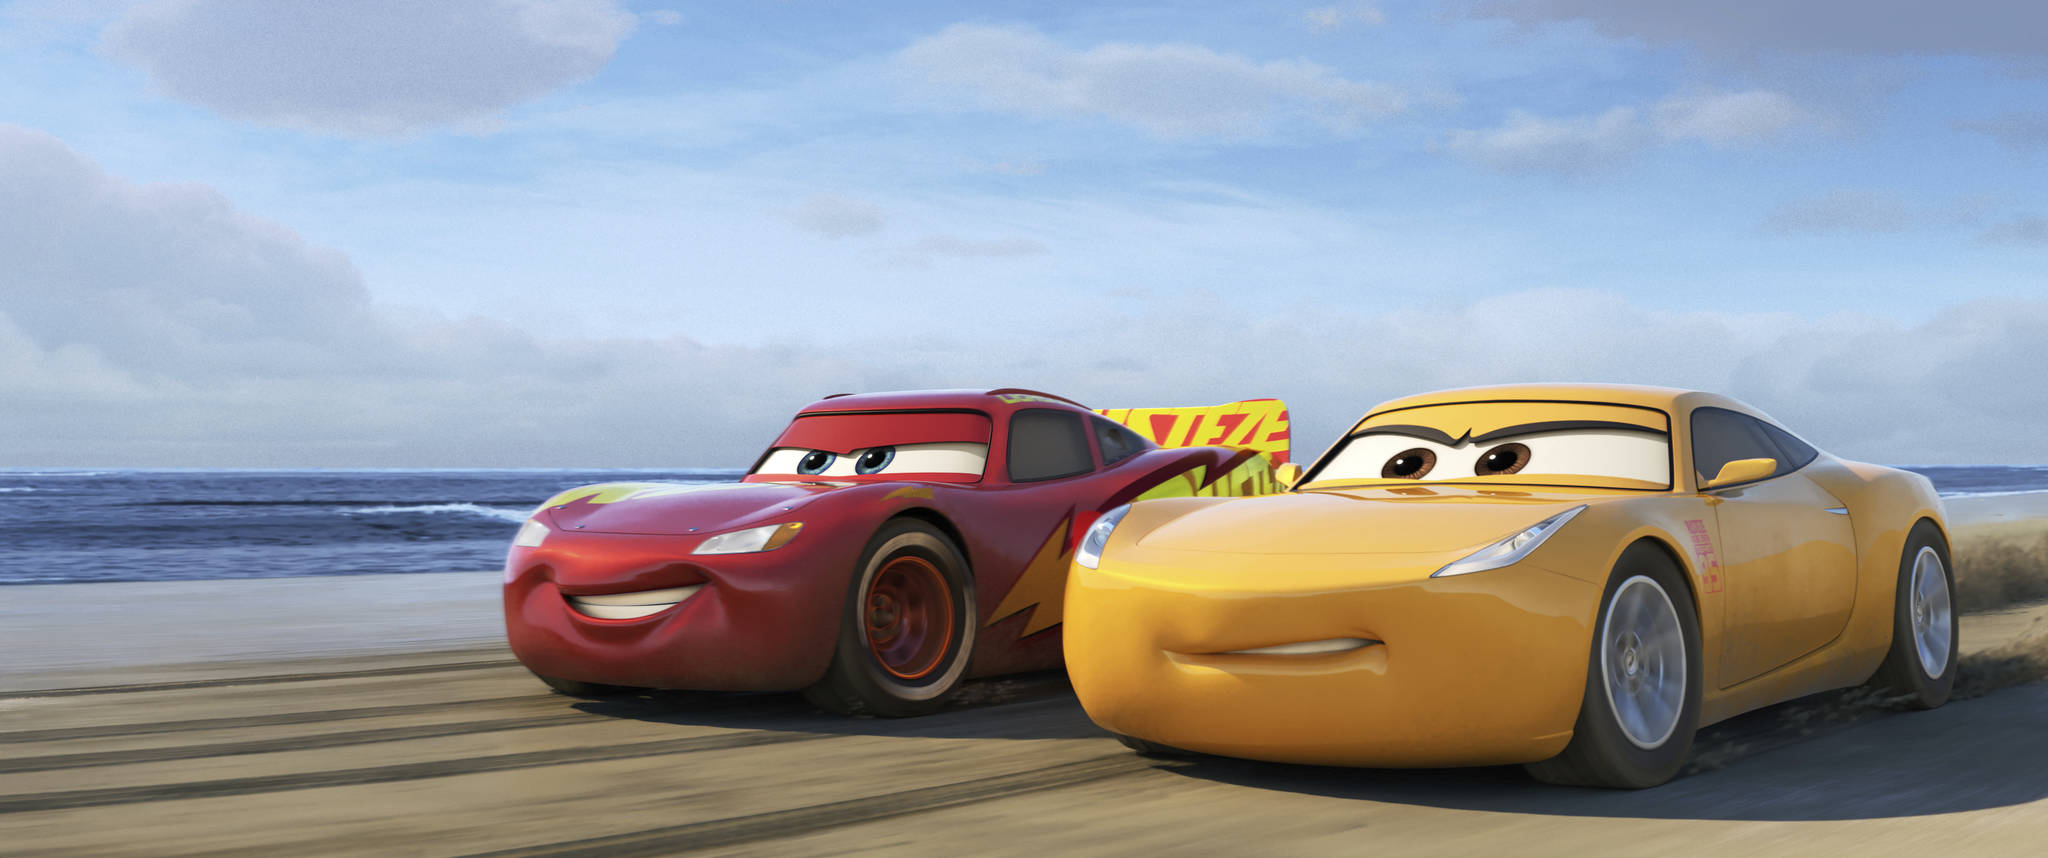 This image released by Disney shows Lightning McQueen, voiced by Owen Wilson, left, and Cruz Ramirez, voiced by Cristela Alonzo in a scene from “Cars 3.” (Disney-Pixar via AP)